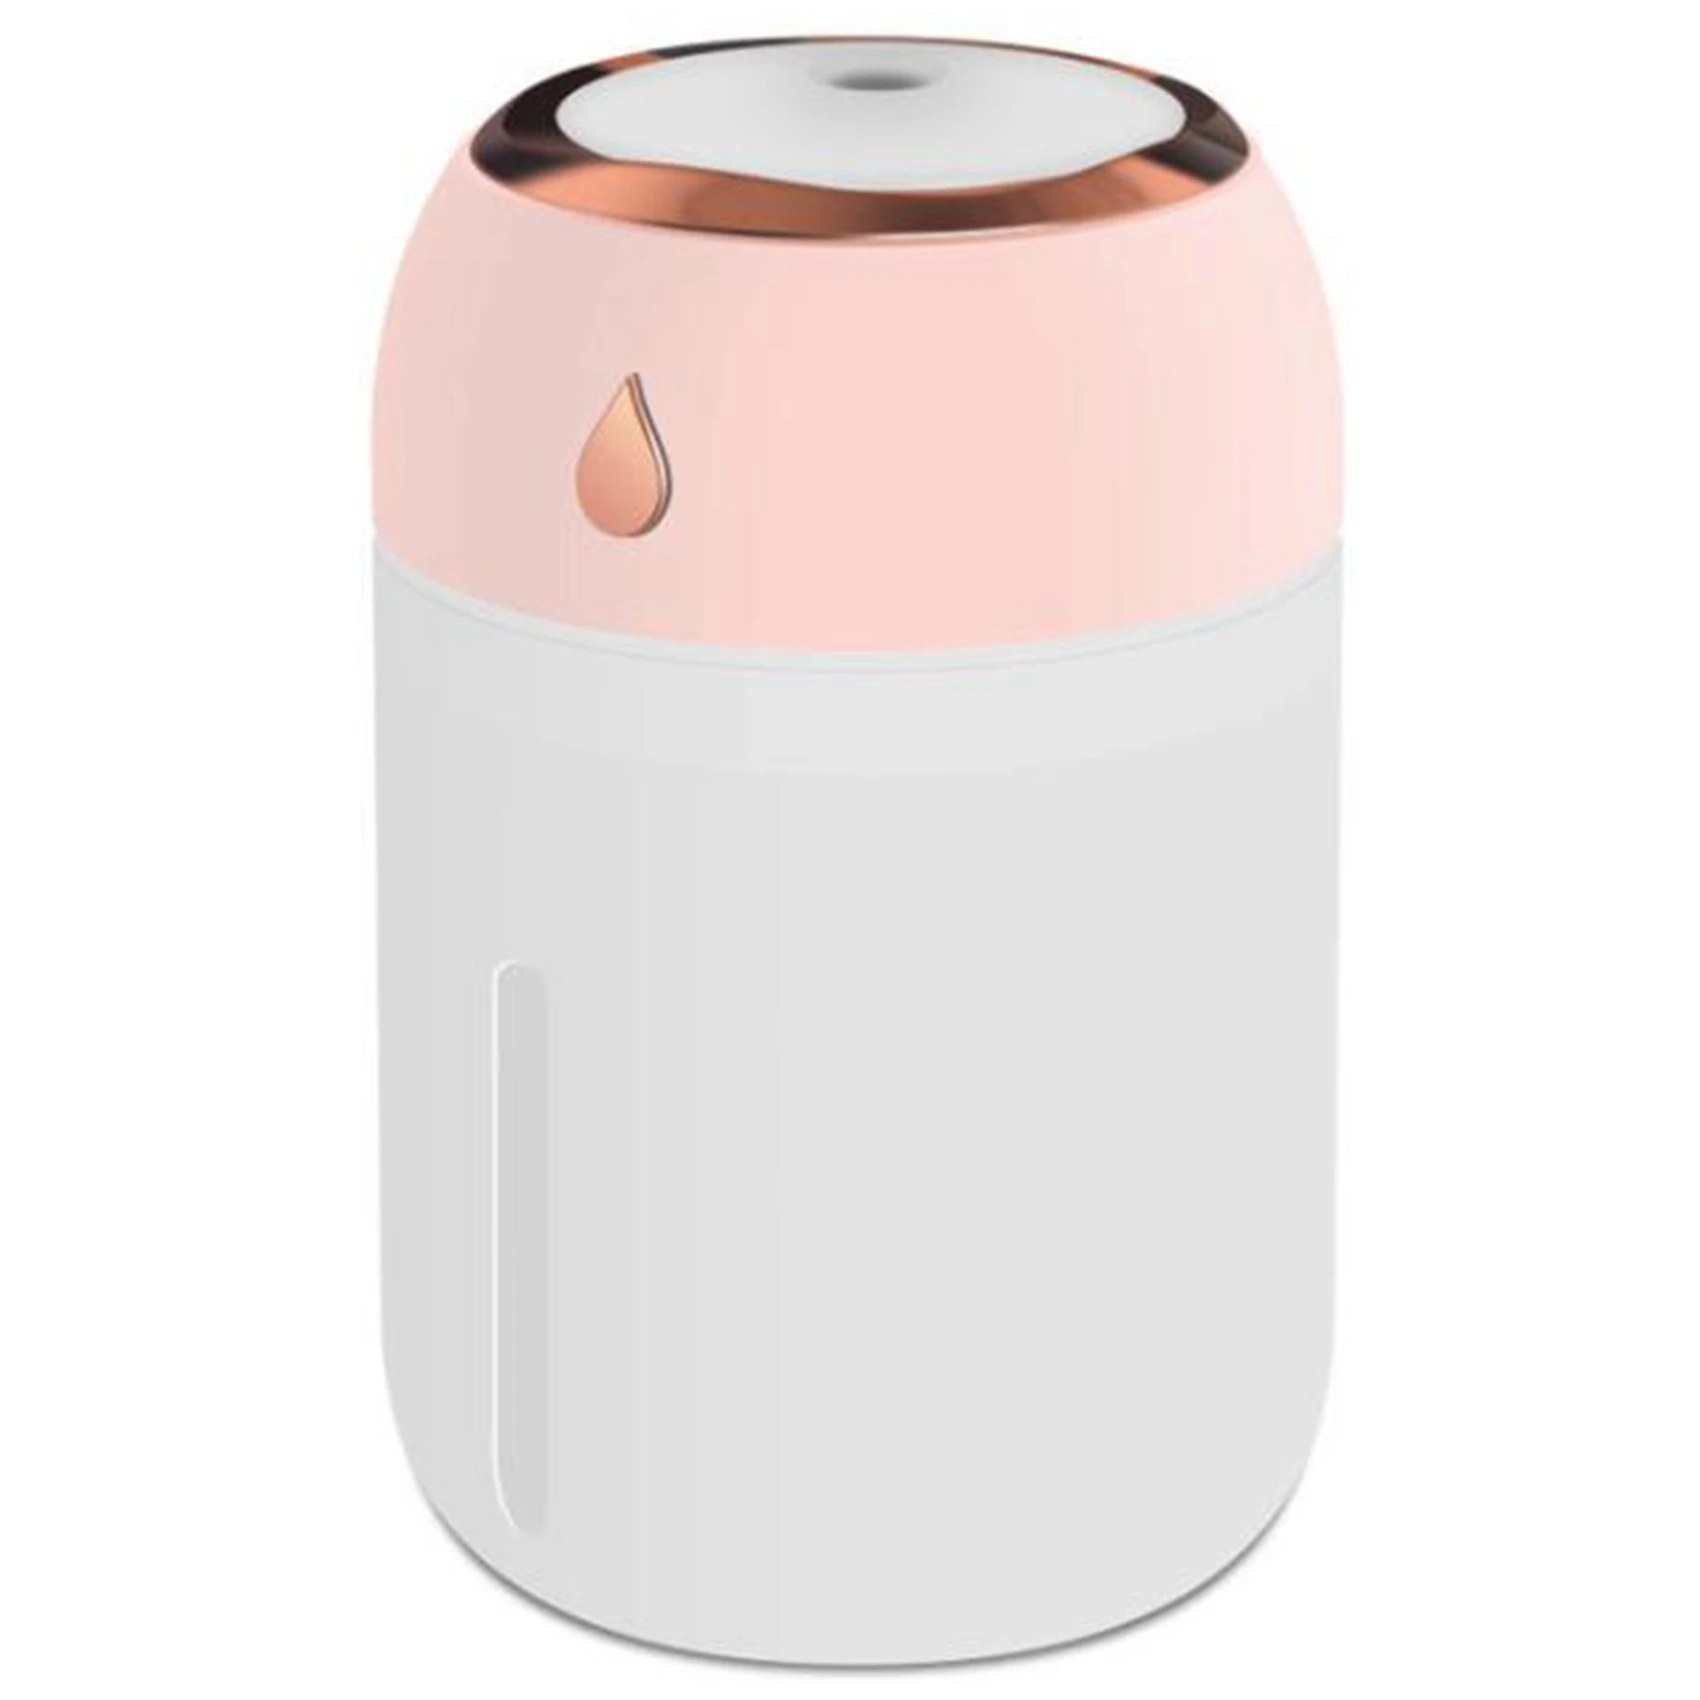 

330ML Mini Portable Air Humidifier Aroma Essential Oil Diffuser USB Mist Maker Aromatherapy Humidifiers for Home Pink